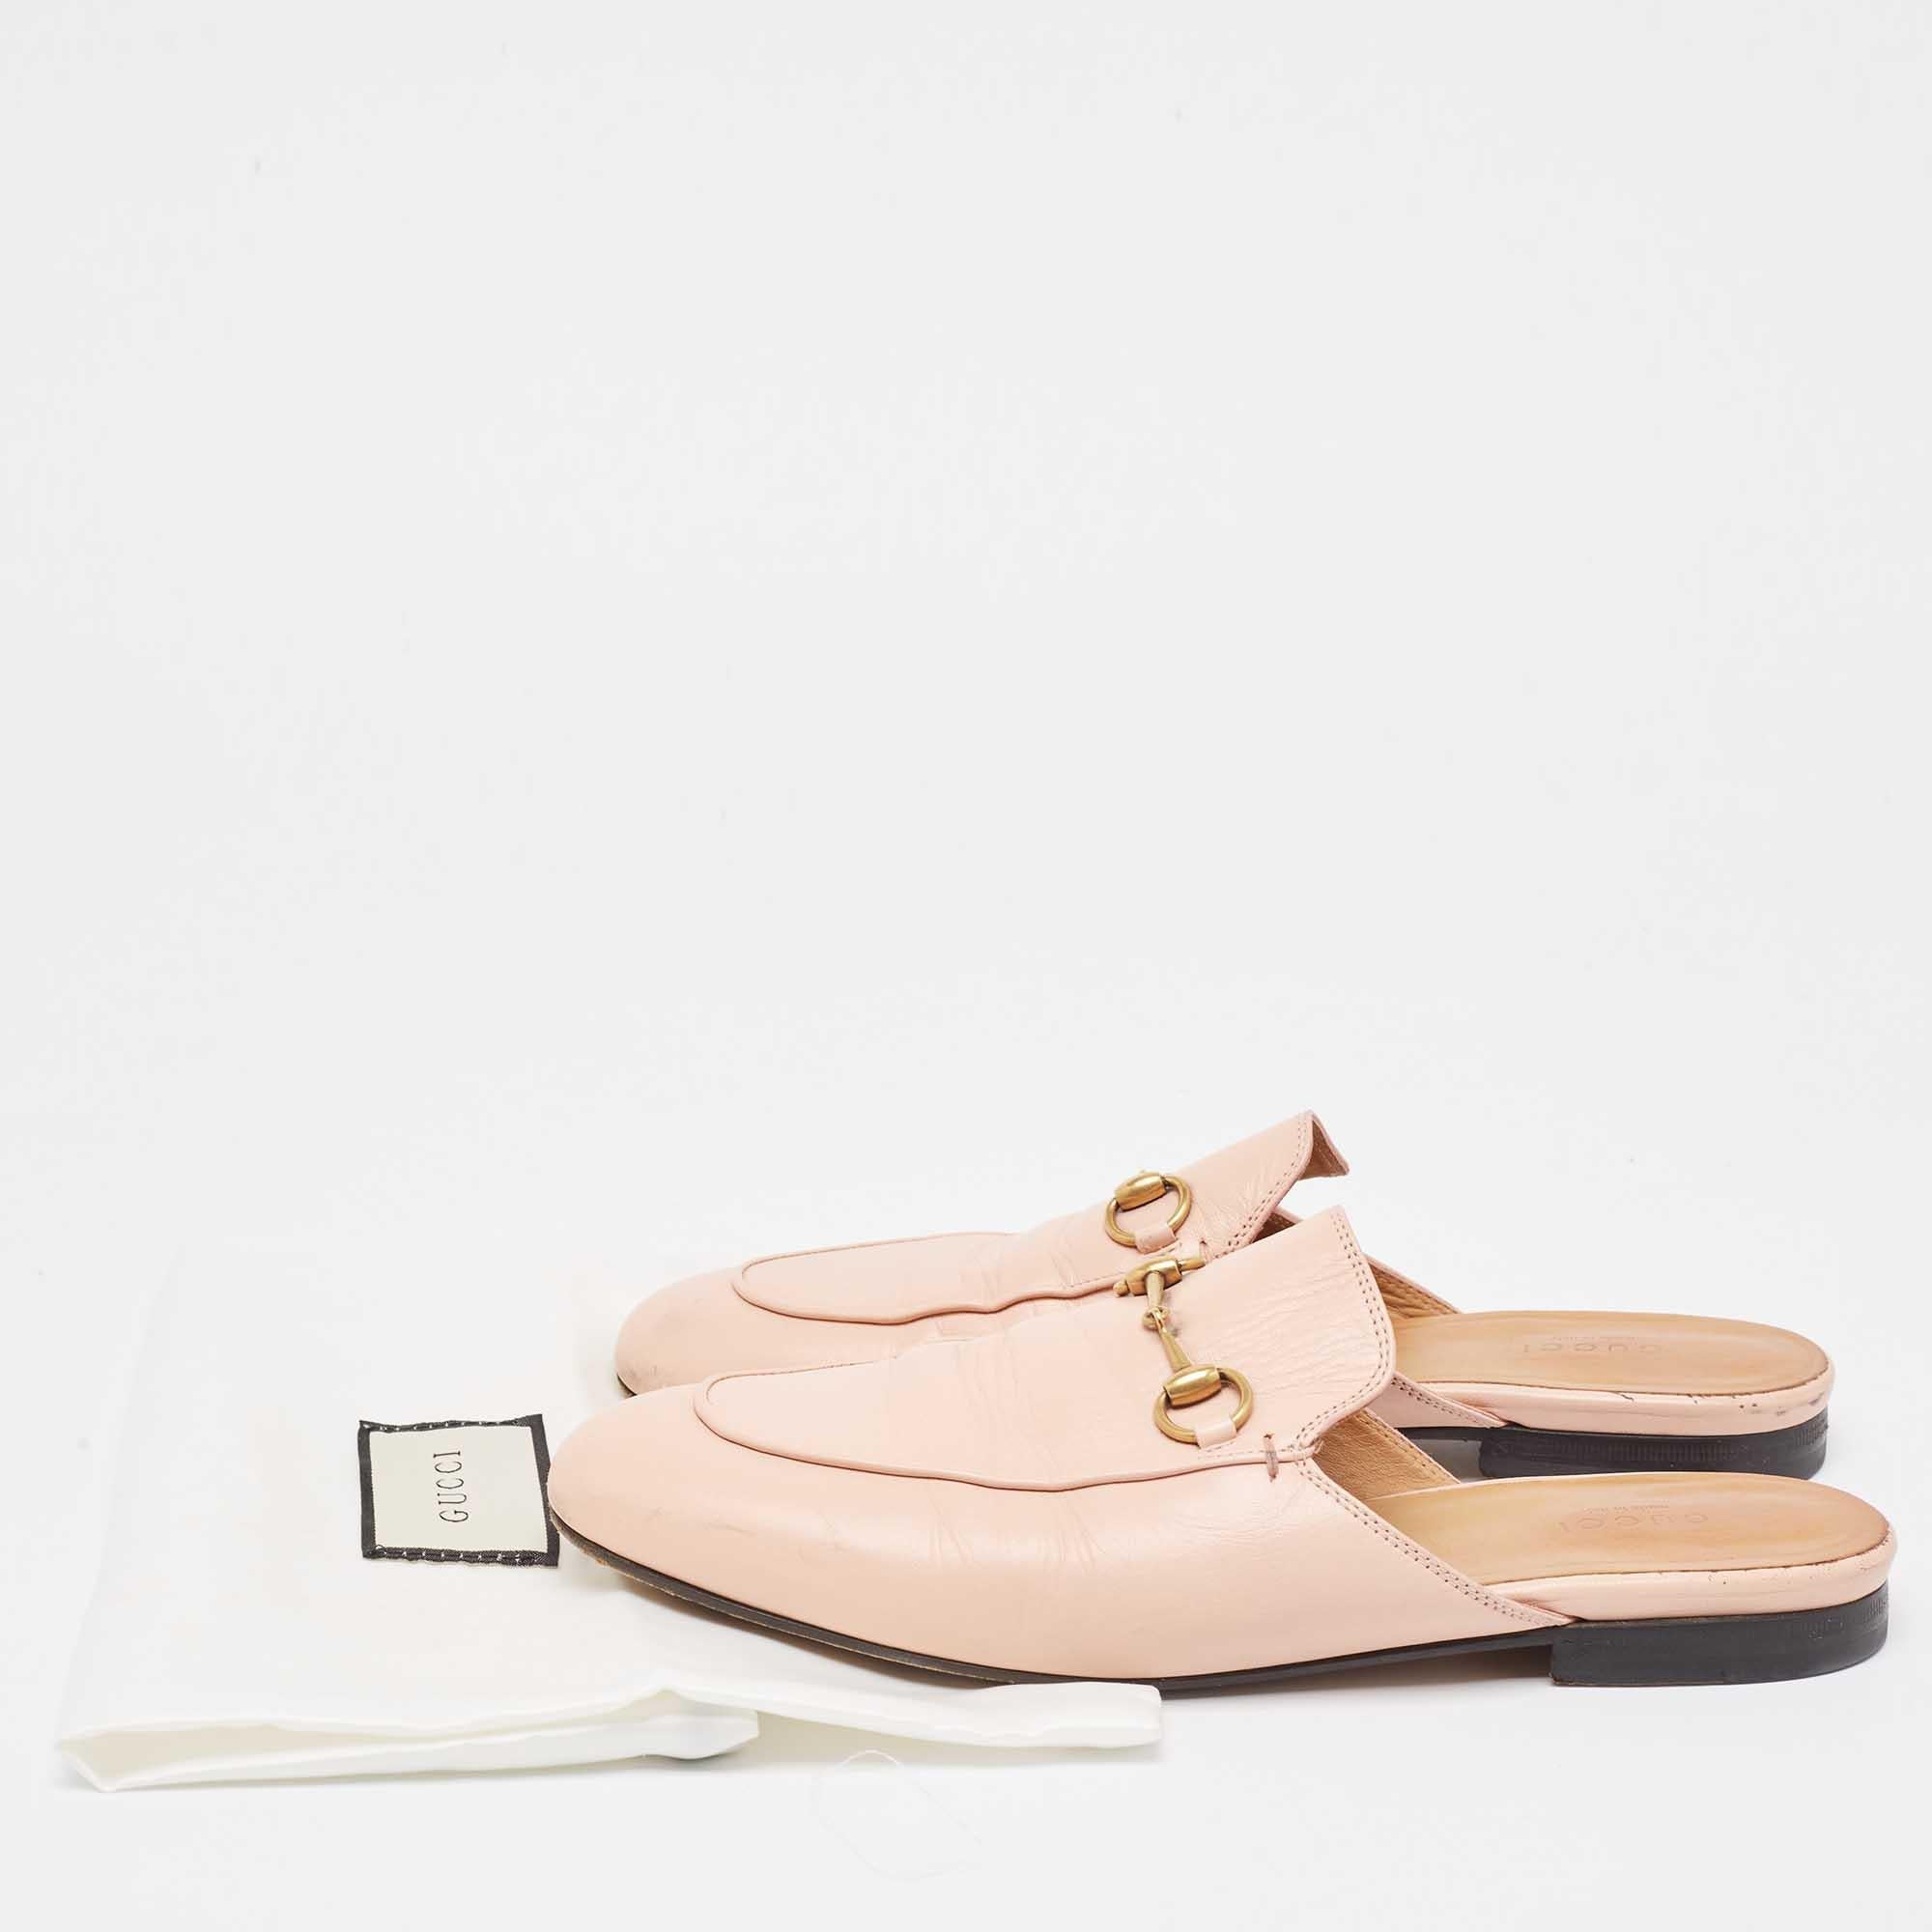 Gucci Pink Leather Princetown Flat Mules Size 39 For Sale 4